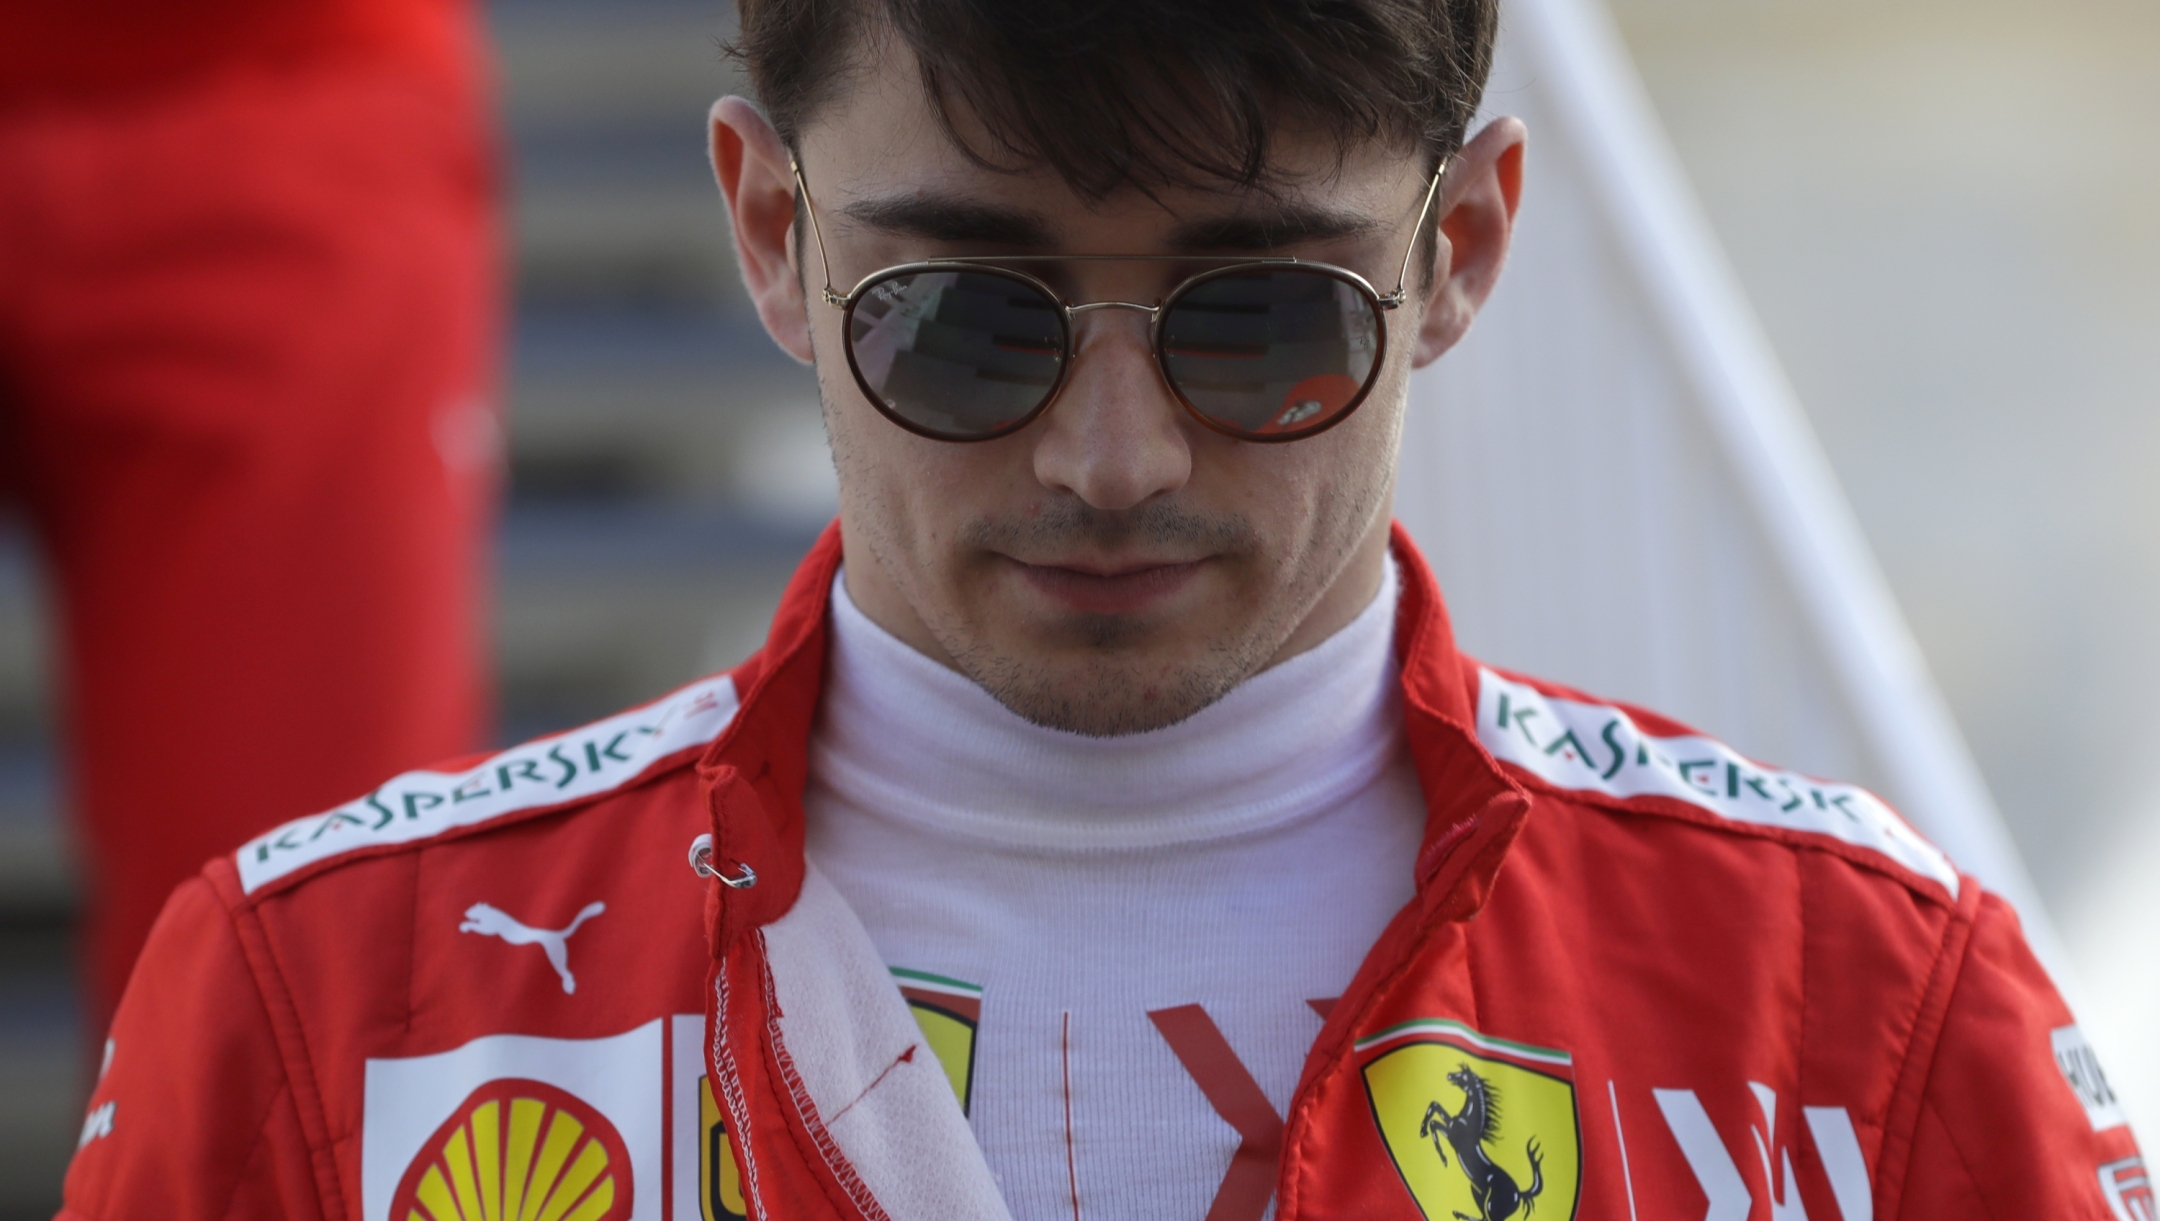 FILE - Ferrari driver Charles Leclerc of Monaco walks through the paddock prior to the qualifying session at the Baku Formula One city circuit in Baku, Azerbaijan, Saturday, April 27, 2019. Leclerc has signed a new multi-year contract with Ferrari on Thursday, Jan. 25, 2024. Ferrari has not revealed the length of Leclerc’s new contract but he says he will stay with the famous Scuderia for “several more seasons.”  (AP Photo/Sergei Grits, File)